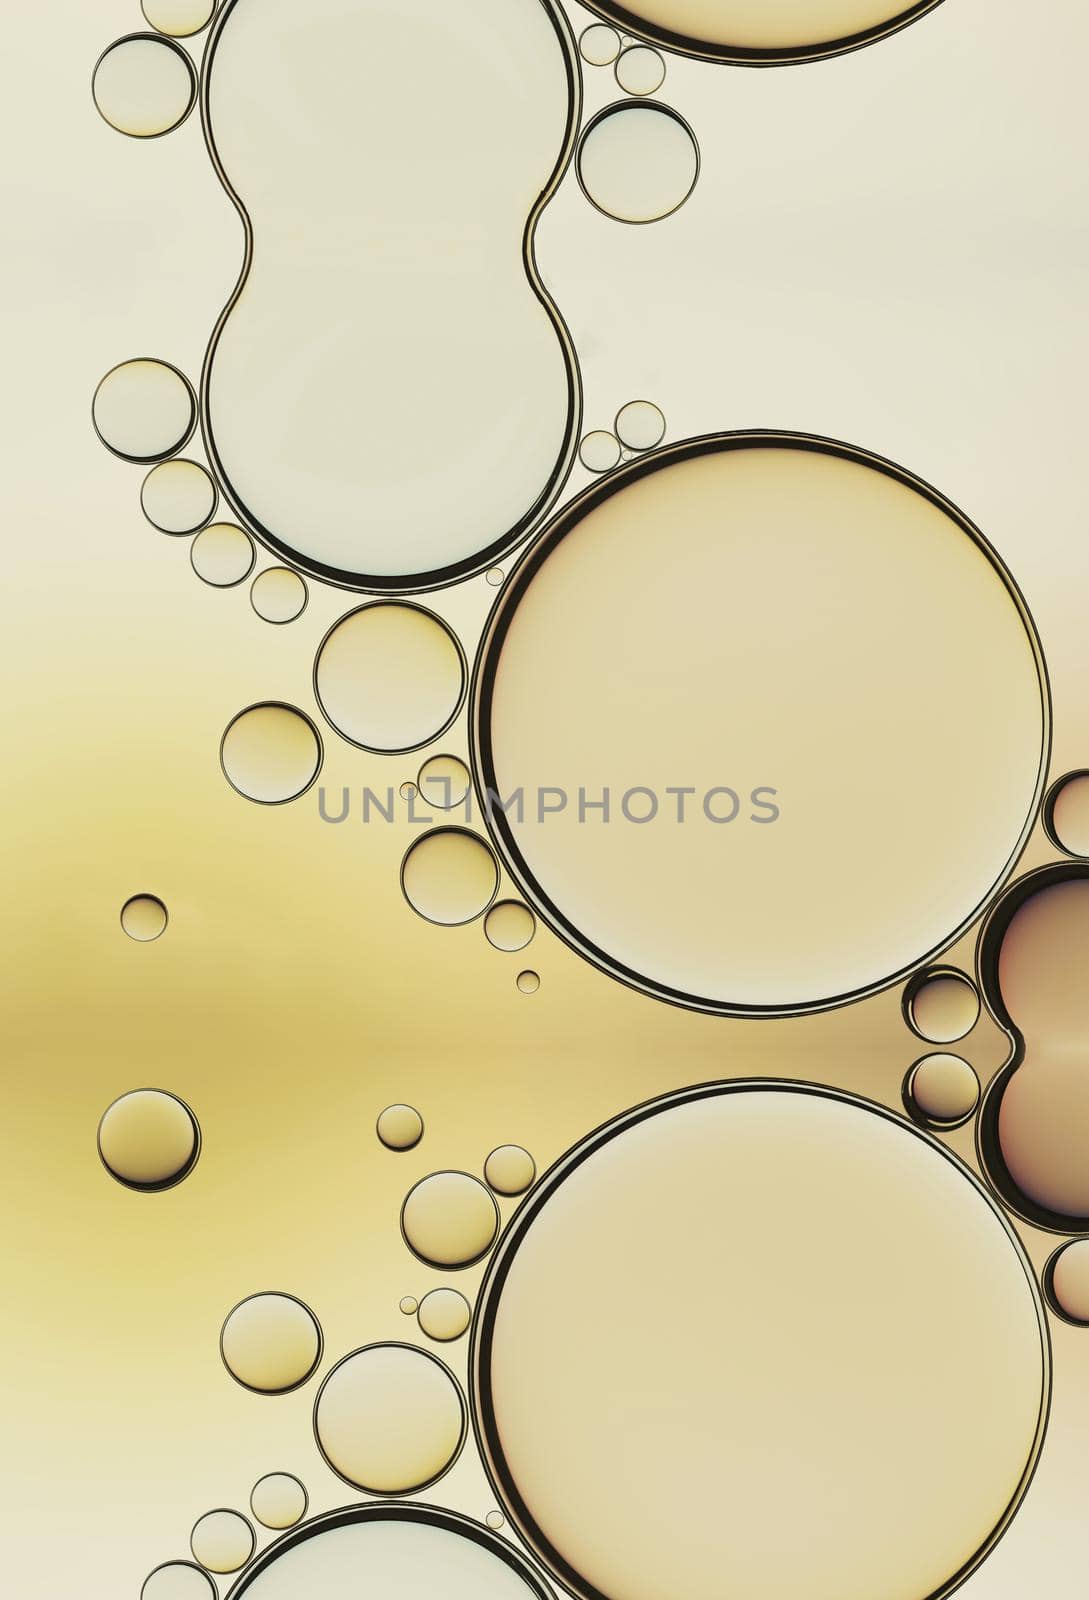 Oil Bubbles Isolated on White Background, Closeup Collagen Emulsion in Water. Illustration. Gold Serum Droplets. by DmytroRazinkov